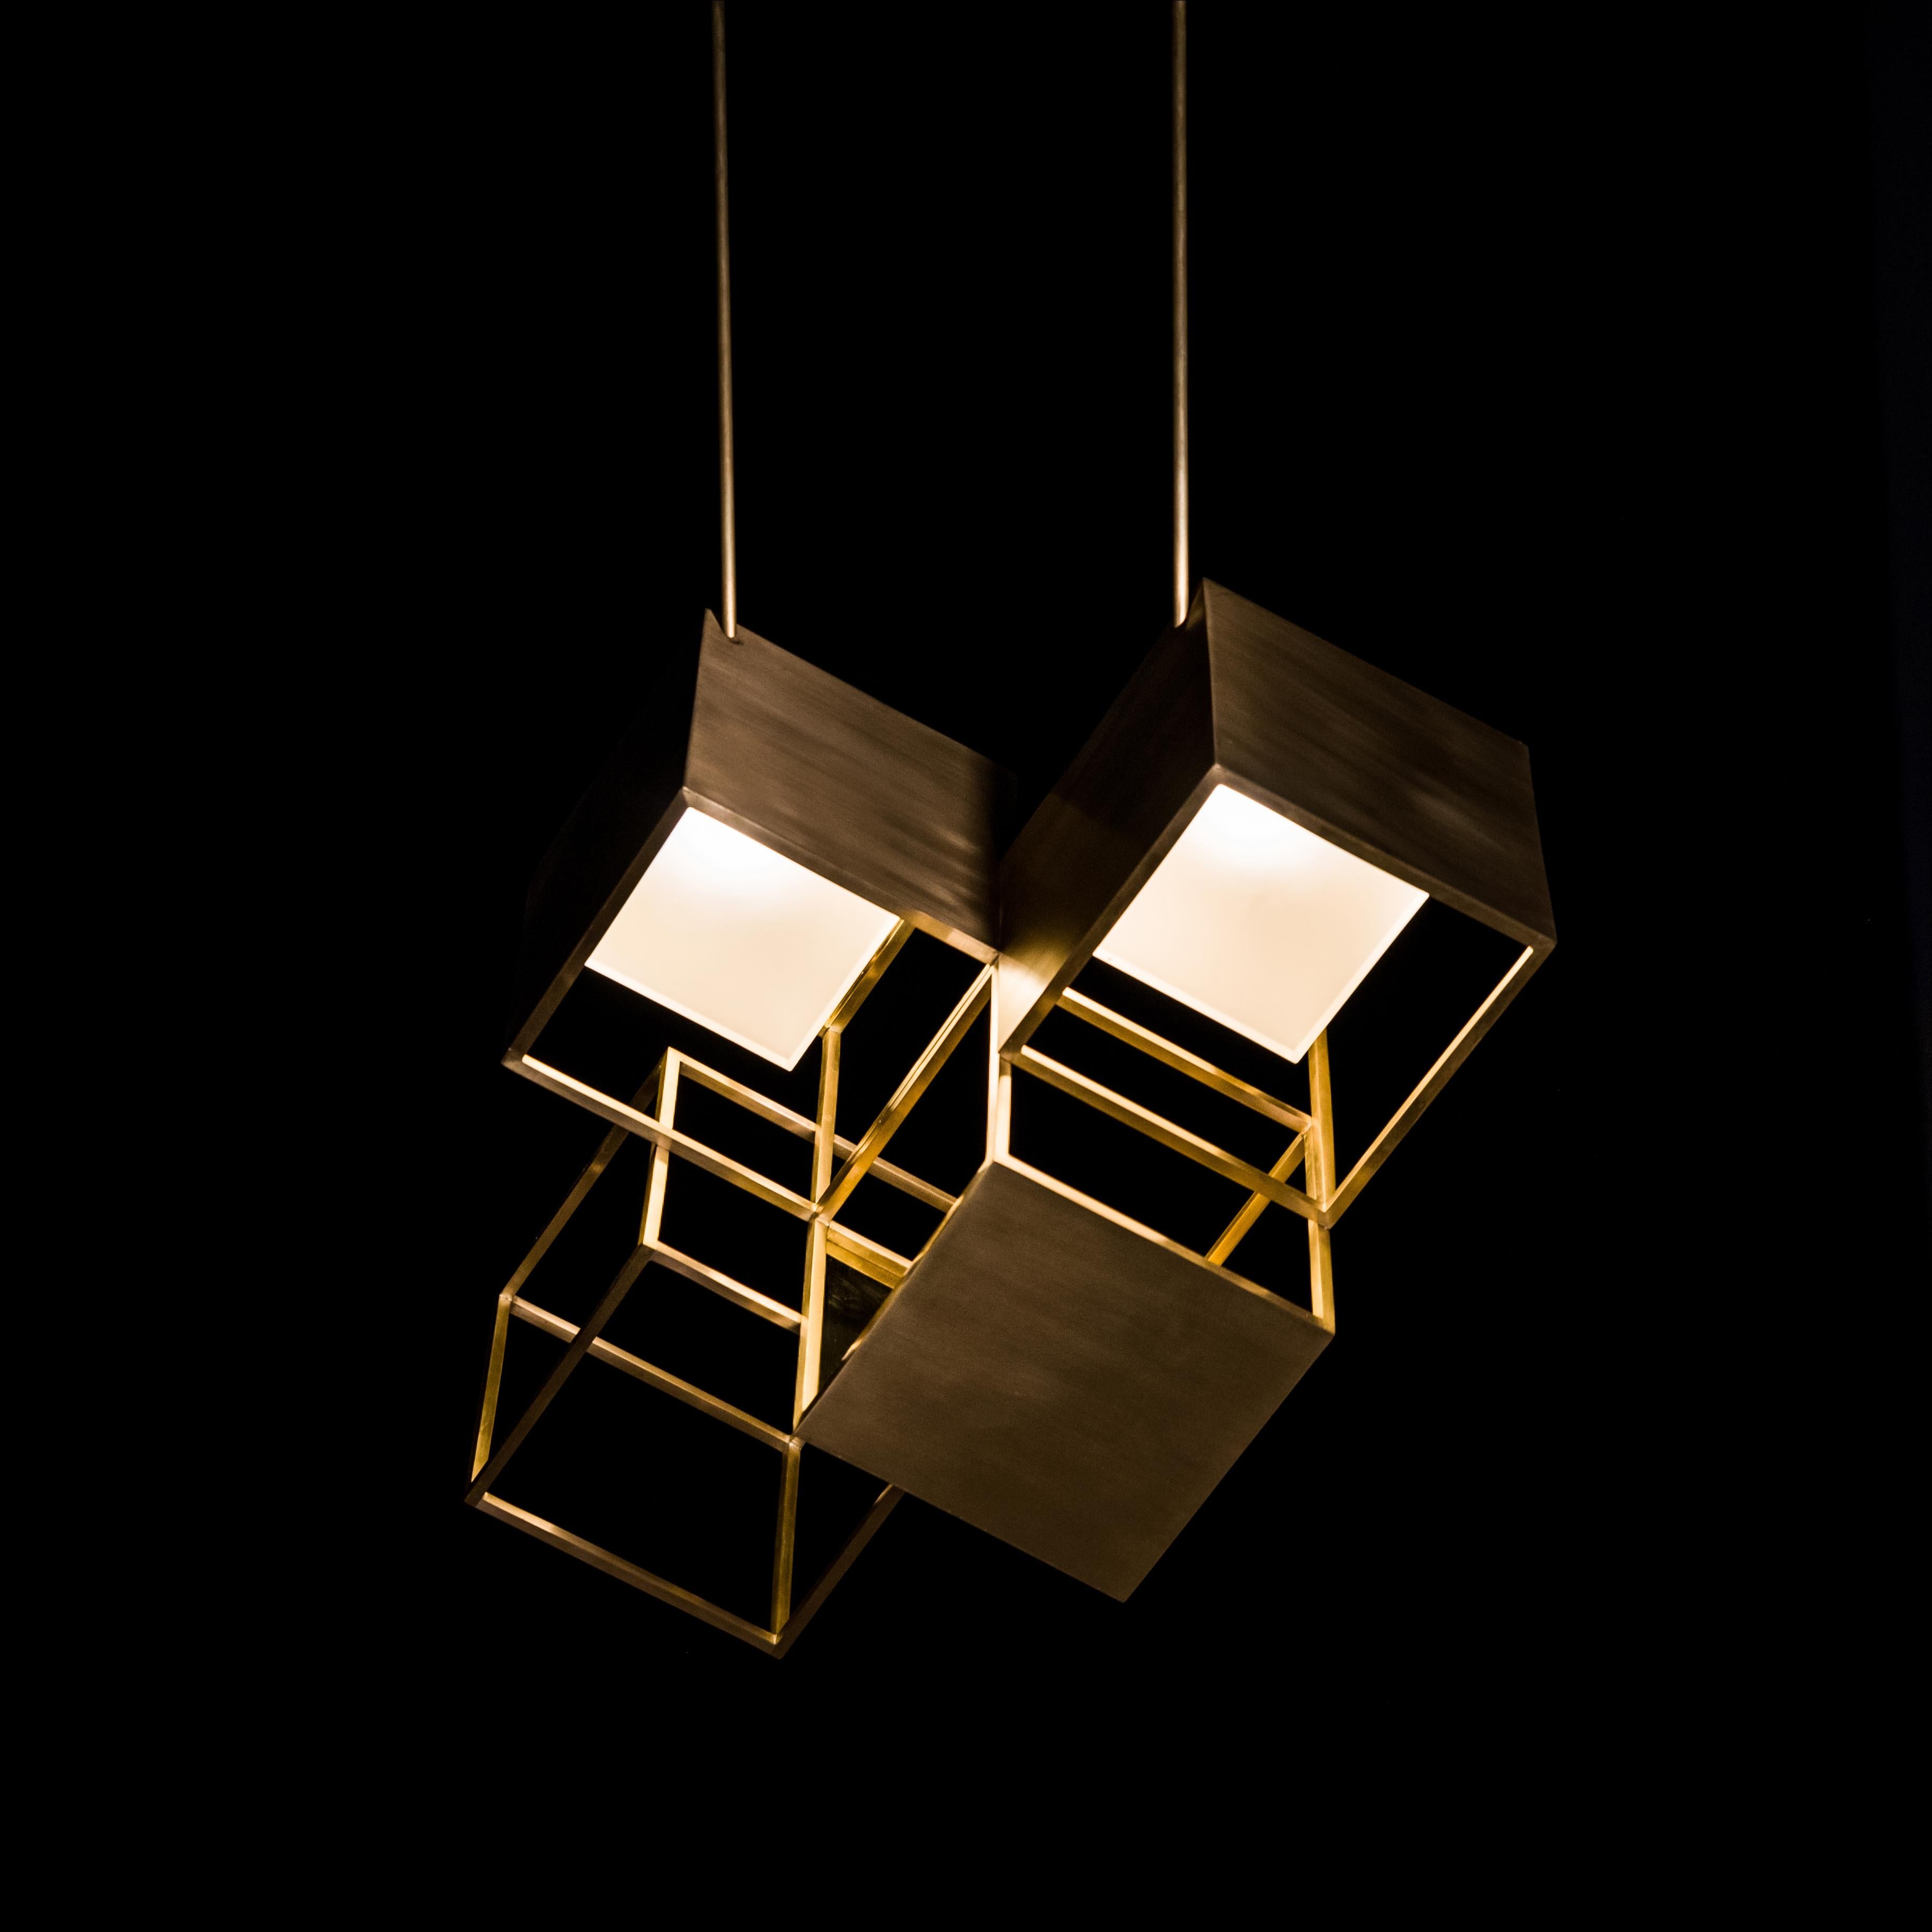 Lattis is conceived as a light piece of jewelry for the interior. It’s something personal, emotional, and fills the space with a strong aesthetic and a dynamic atmosphere.

Made of standardised basic units, Lattis can be assembled in multiple ways